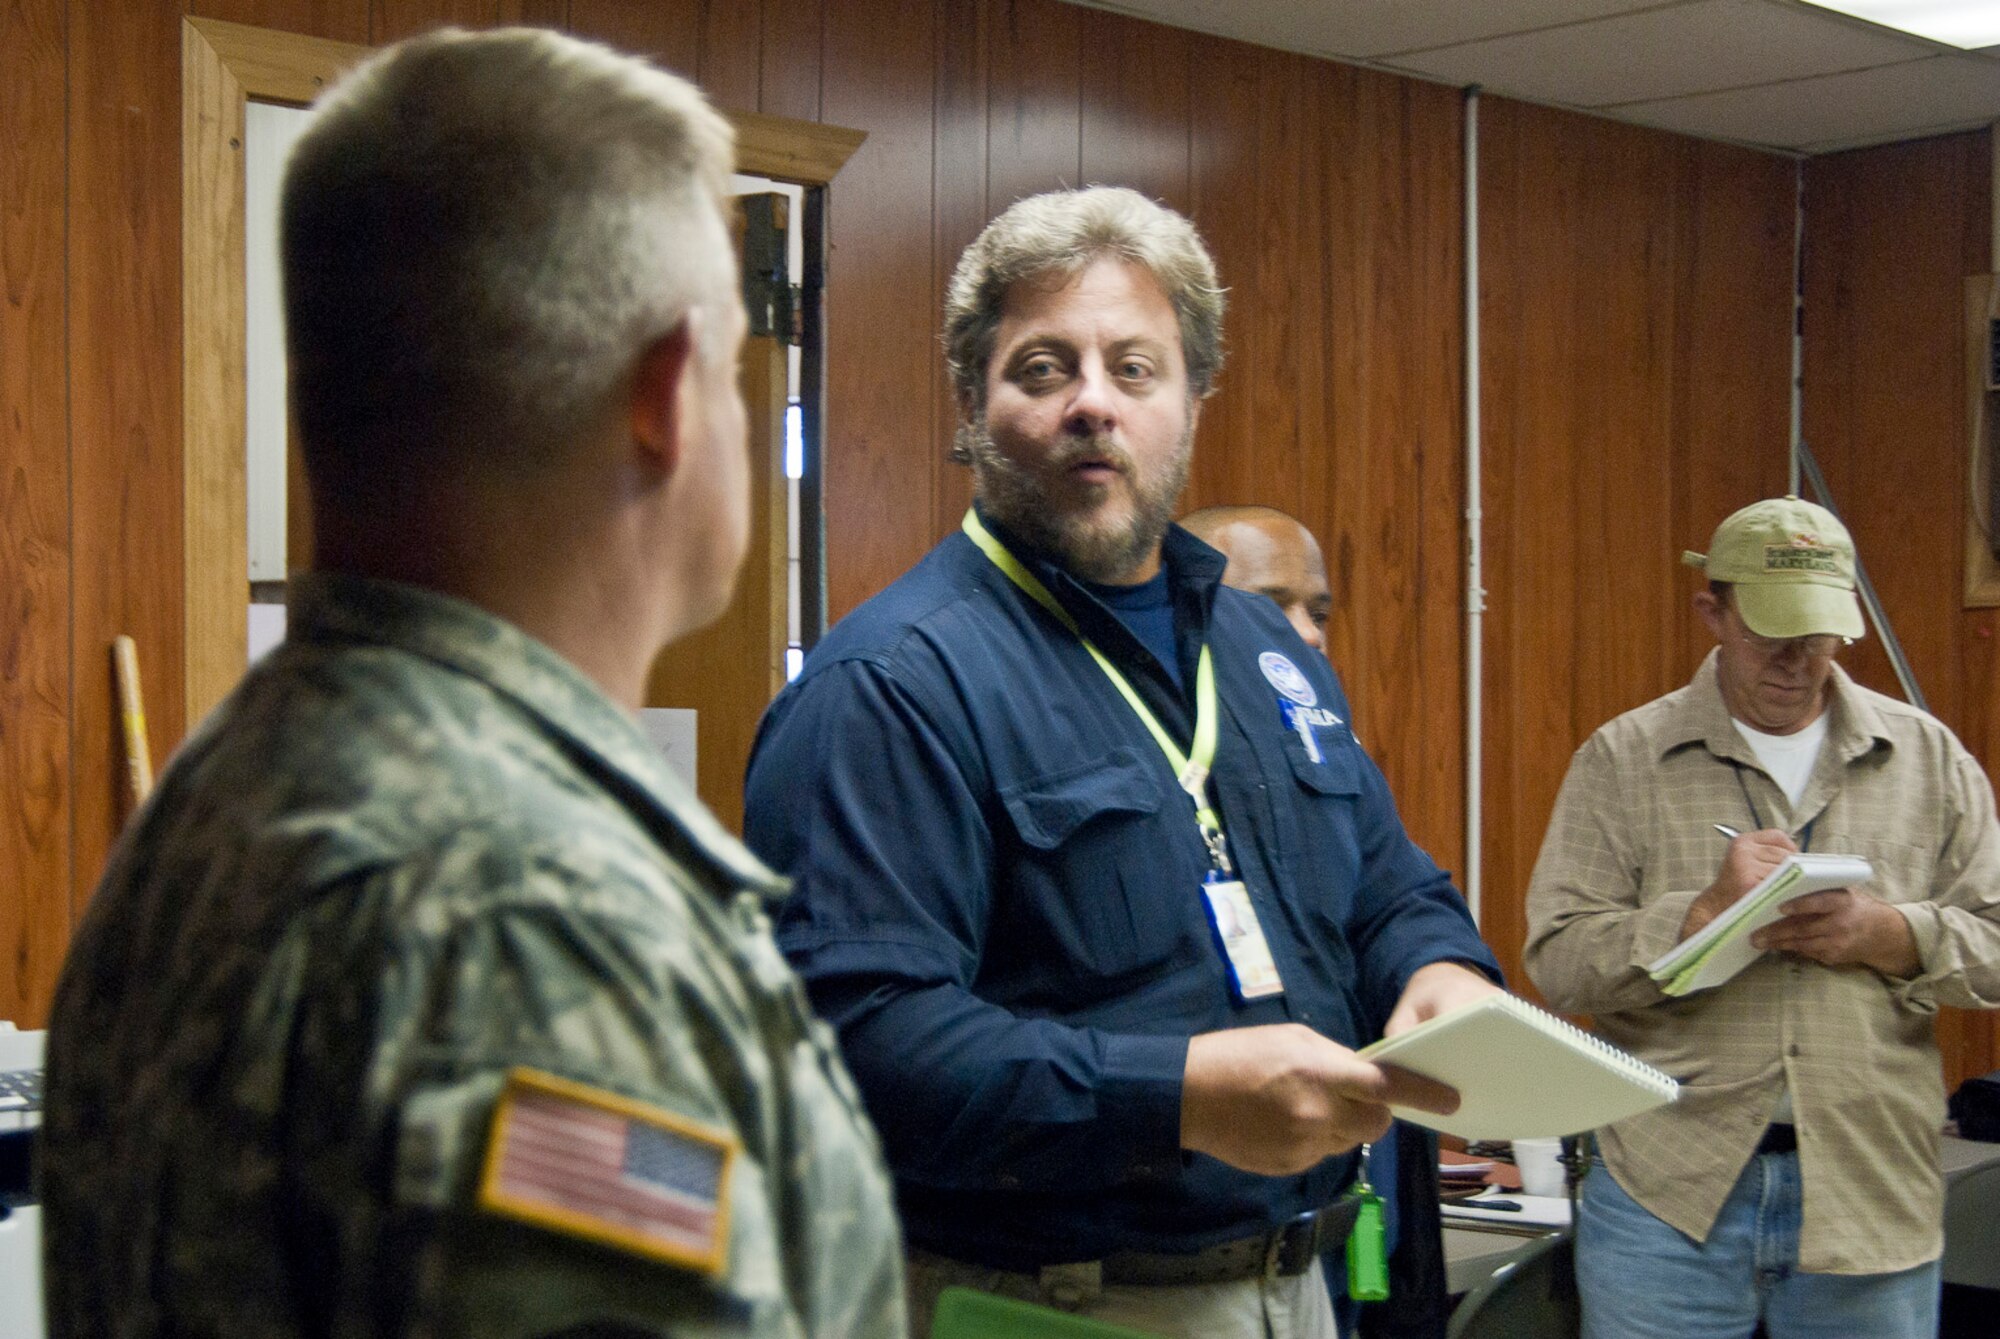 Joseph D'Angelo, Joe D'Angelo, FEMA's Incident Management Assistance Team (IMAT) logistics chief for Region III comments to West Virginia National Guardsman, Master Sgt. Keith Bibb, 77th Brigade property book officer, during a meeting to coordinate operations at the 167th Airlift Wing, West Virginia Air National Guard, based in Martinsburg W.Va., Thursday Nov. 1, 2012. The 167th AW is serving as a staging area for disaster relief supplies which will then be transported throughout West Virginia by the 77th Brigade’s 1201st Forward Support Company based in Kingwood W.Va. and Delta 230th FSC based in Glen Jean, W.Va. The West Virginia National Guard has over 200 members aiding in recovery efforts from Hurricane Sandy.  The storm blanketed the state with heavy snow and rains and also had severe winds that left homes and properties damaged.  Guardsmen are involved in numerous aspects of the operations from search and rescue missions to debris removal. (Air National Guard photo by Master Sgt. Emily Beightol-Deyerle)